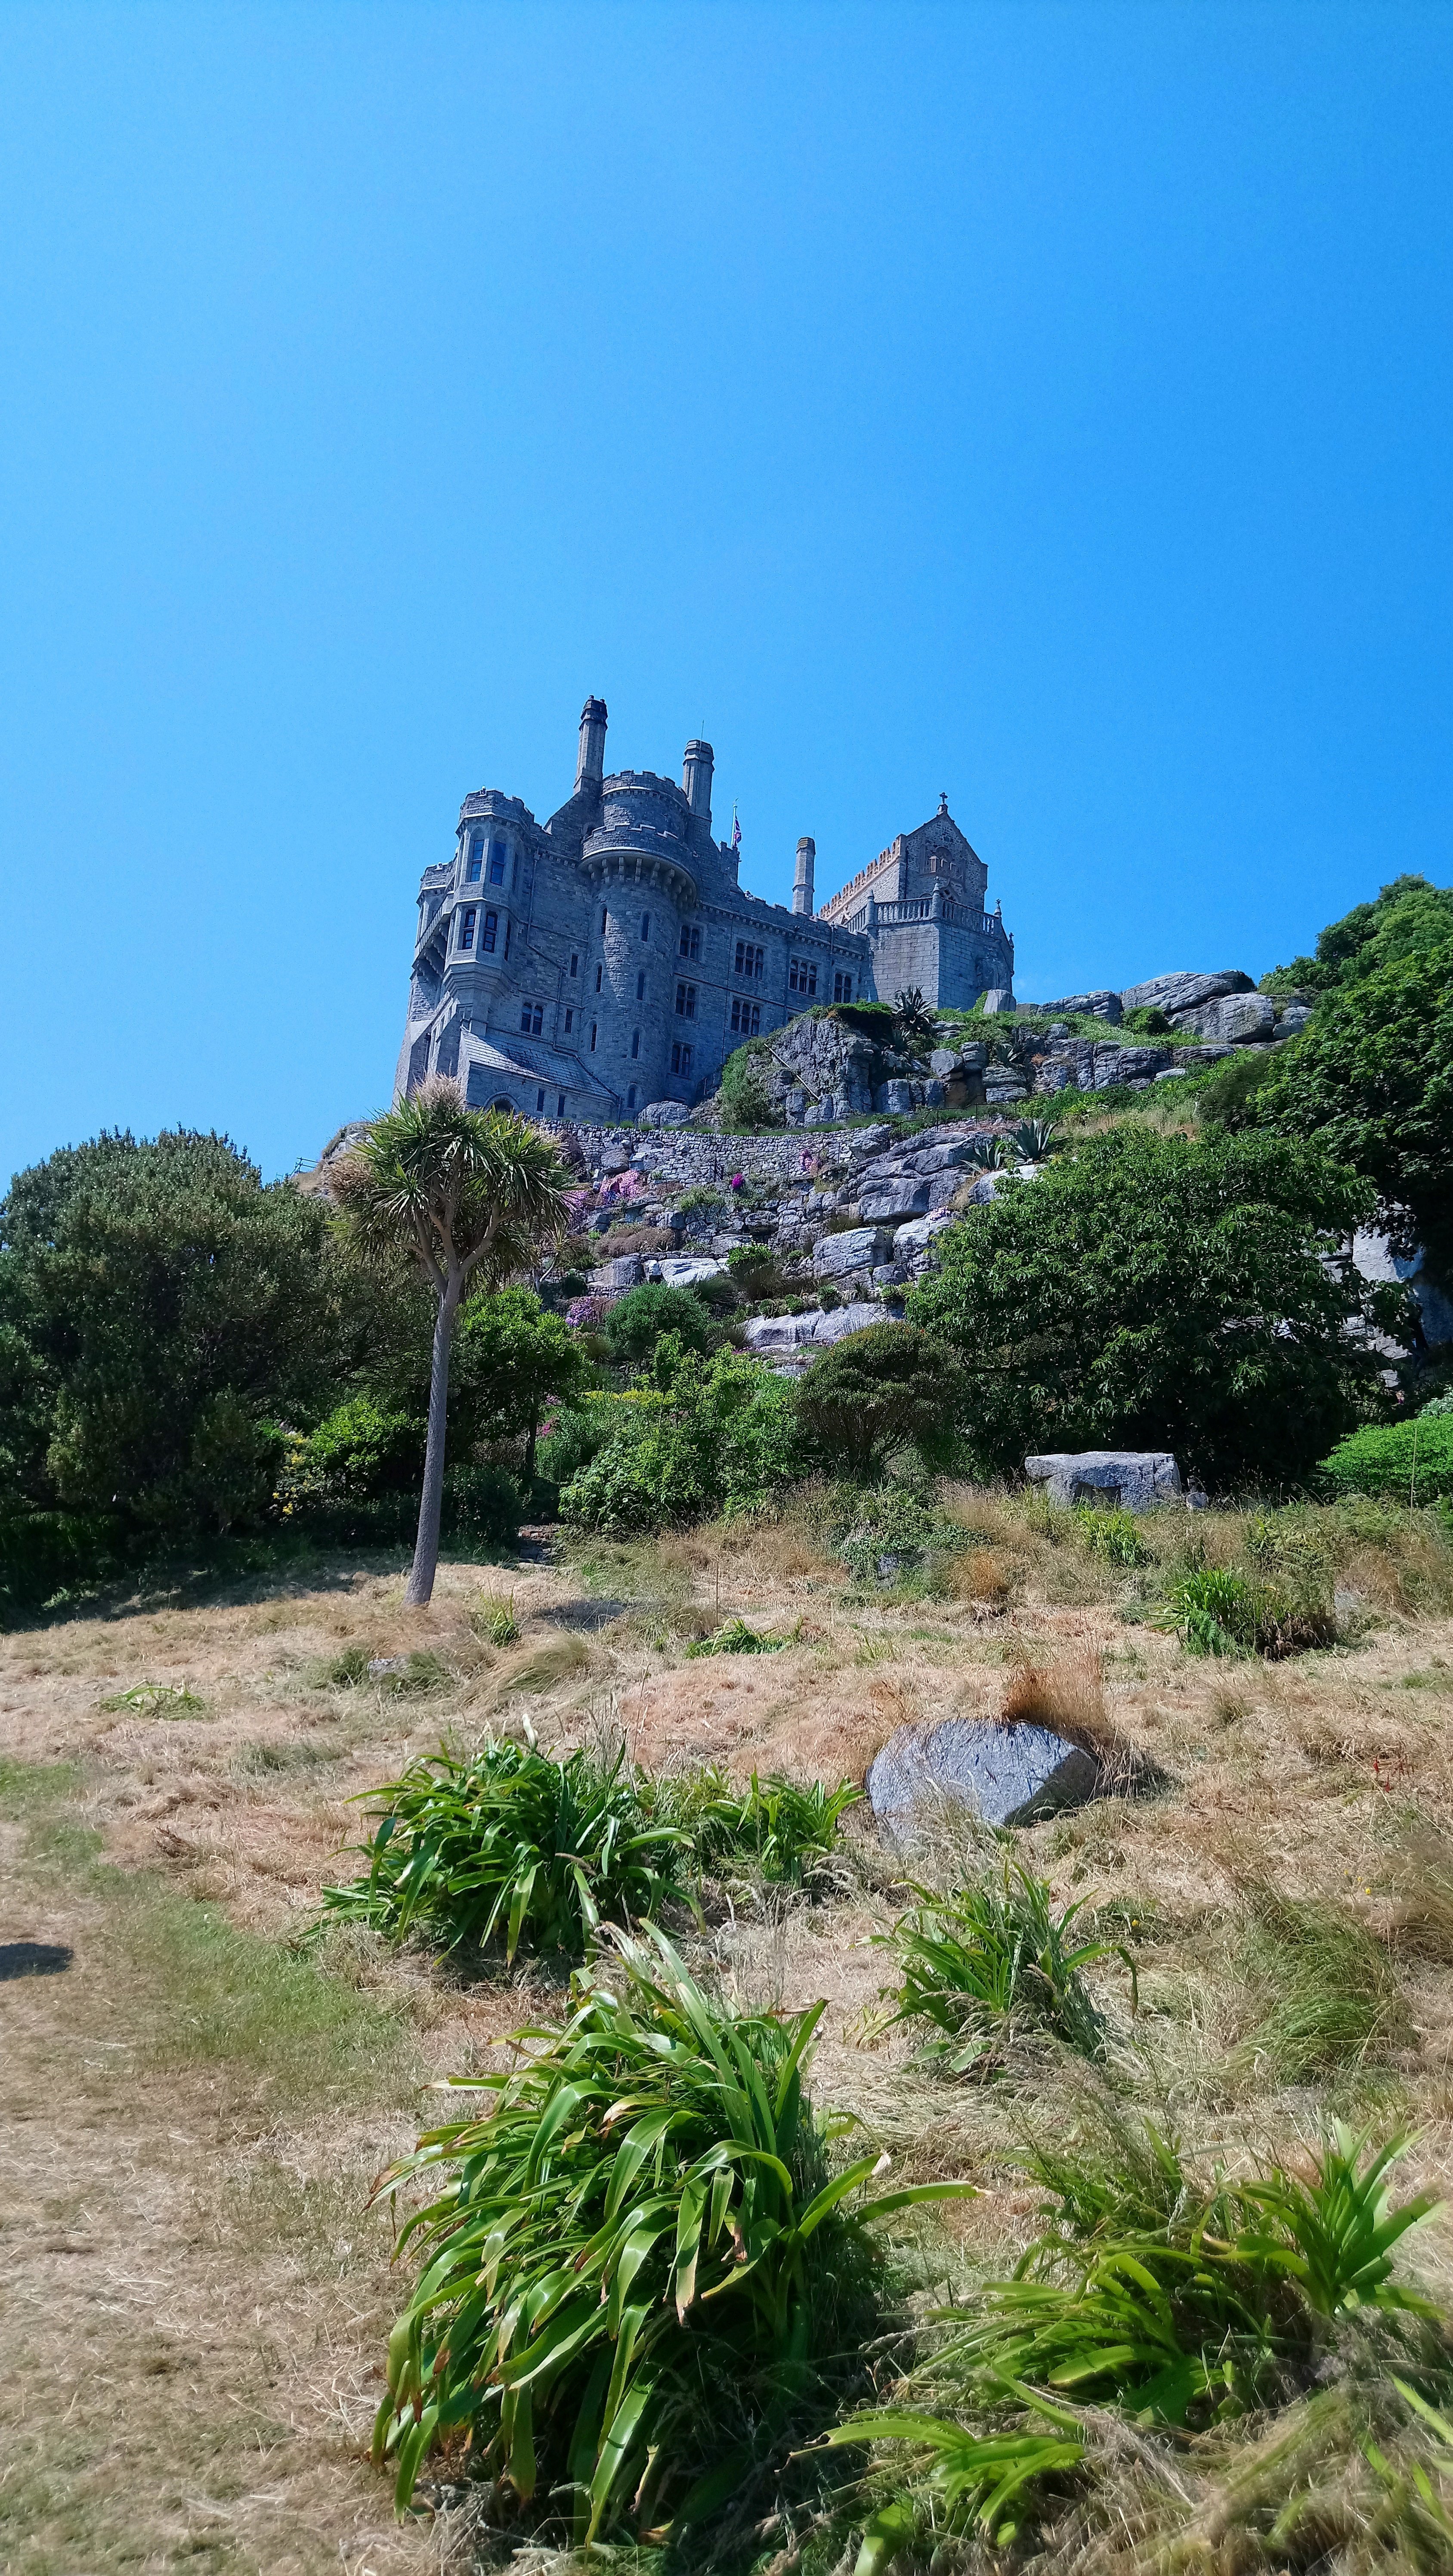 Looking up at St.Michael’s Mount castle from the lower grounds